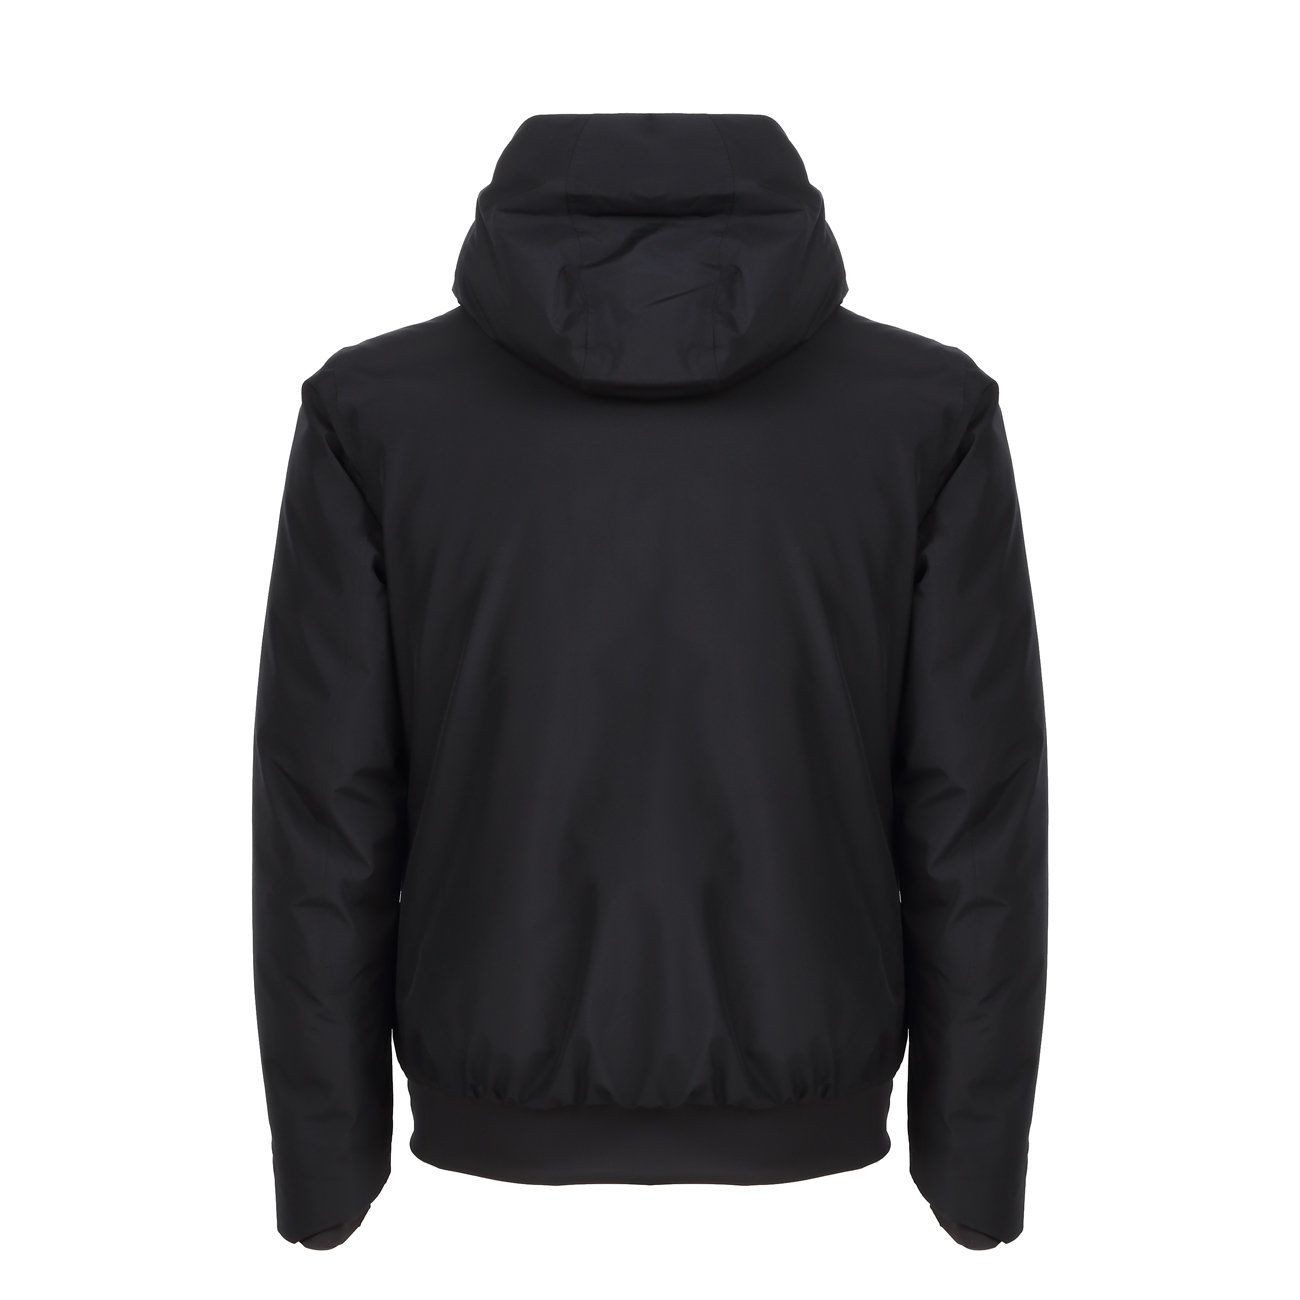 SAVE THE DUCK GORETEX JACKET WITH FULLZIP AND HOOD Man Black